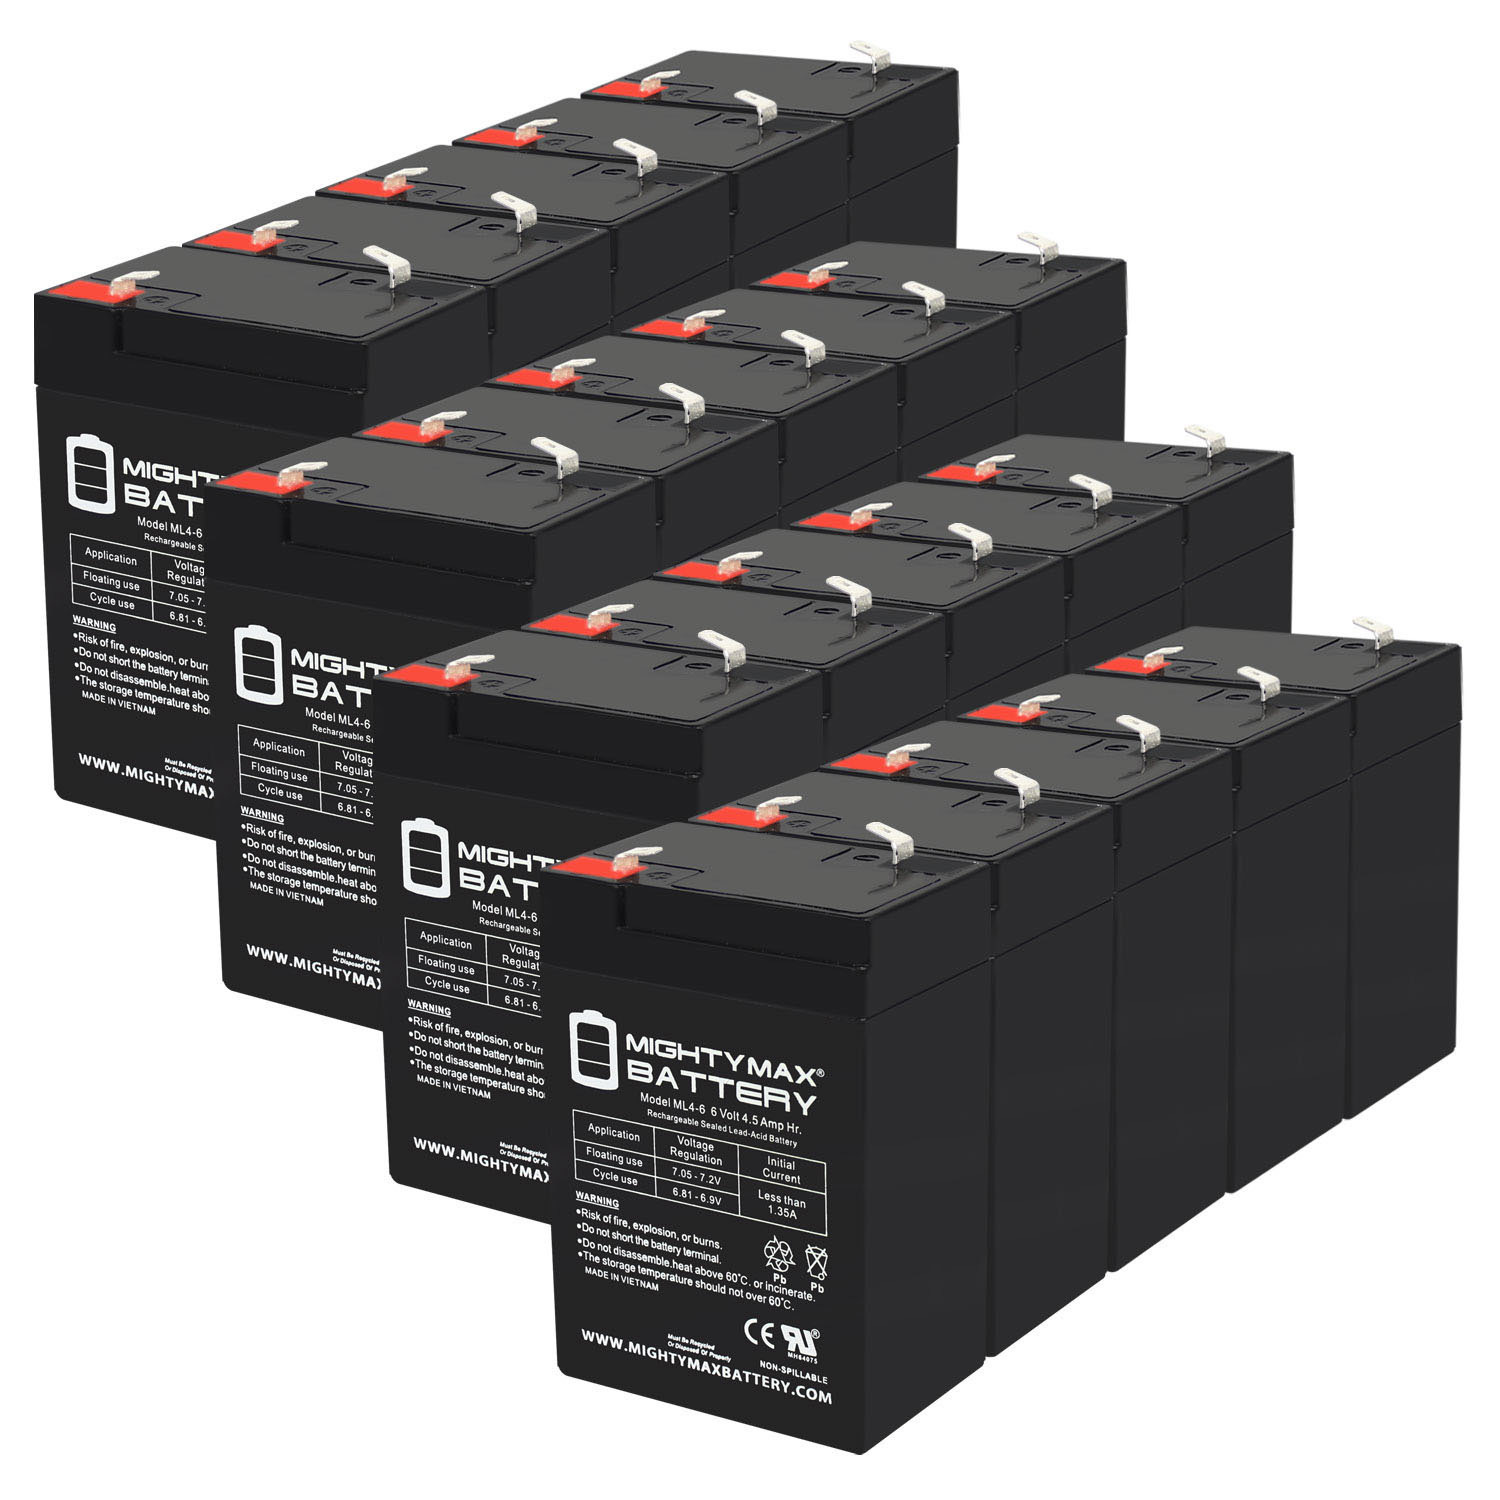 6V 4.5AH SLA Replacement Battery for Dual-Lite ERS-2I-2 - 20 Pack